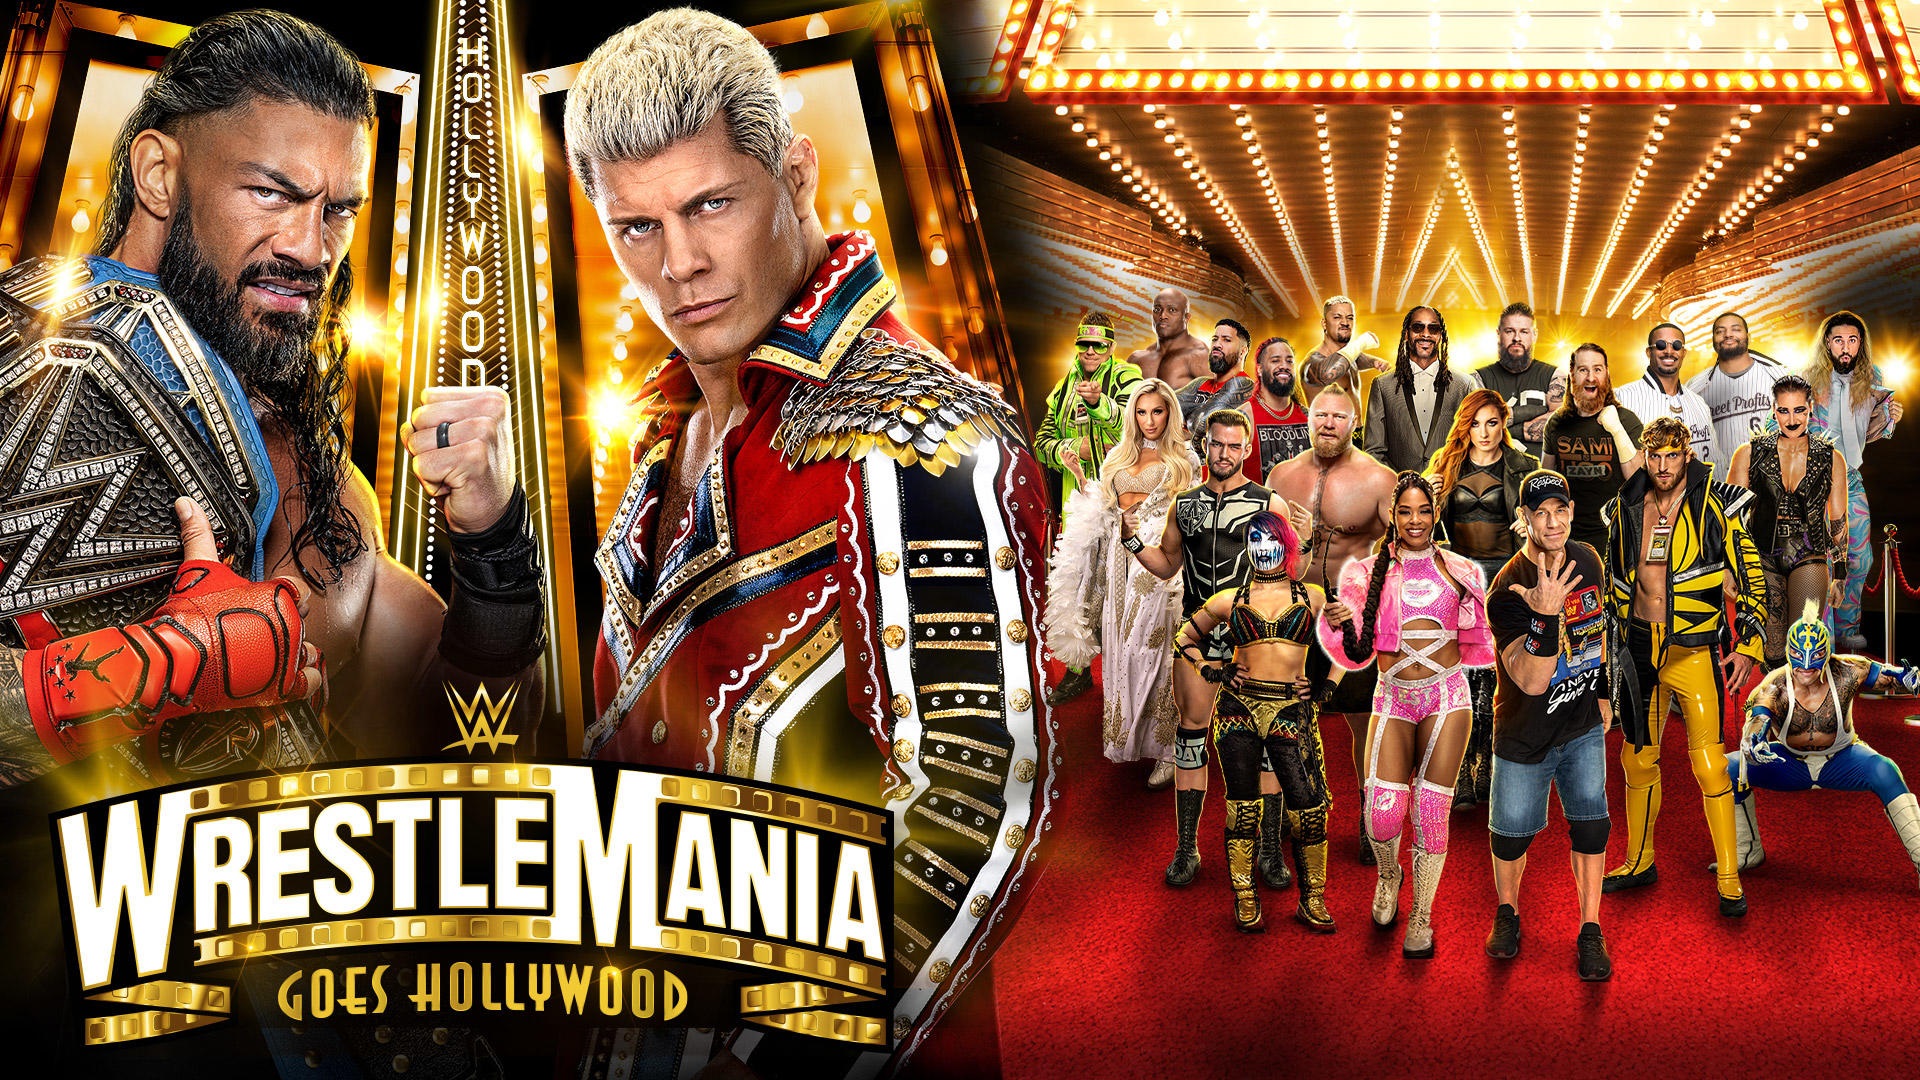 WWE 2023 WrestleMania goes Hollywood What we know so far + Where to